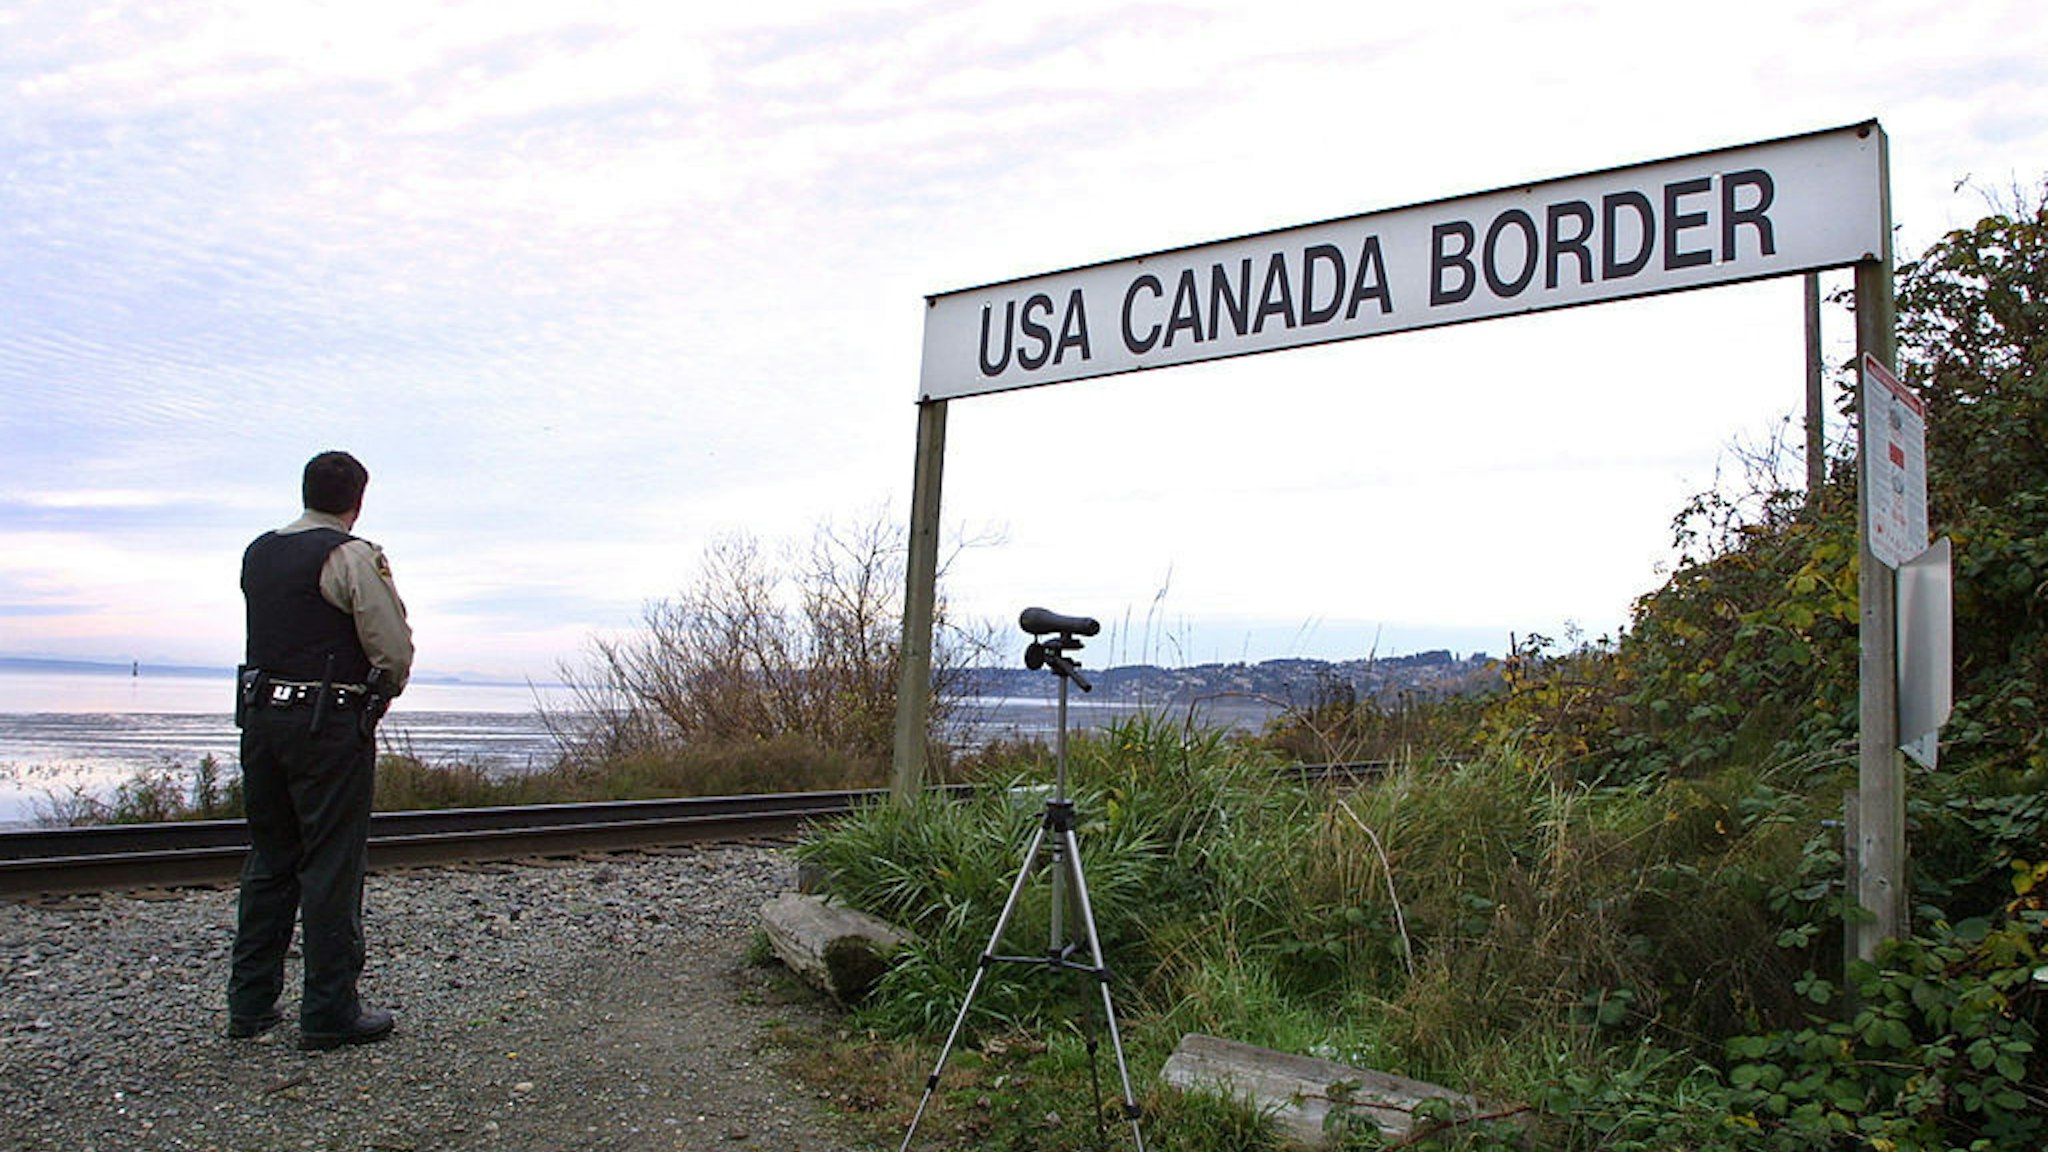 A Canadian Customs and Fisheries officer watches over the U.S.-Canada border between Blaine, Washington and White Rock, British Columbia November 8, 2001 in White Rock, BC. The Peace Arch border crossing is one of the busiest crossings in North America. (Photo by Jeff Vinnick/Getty Images)